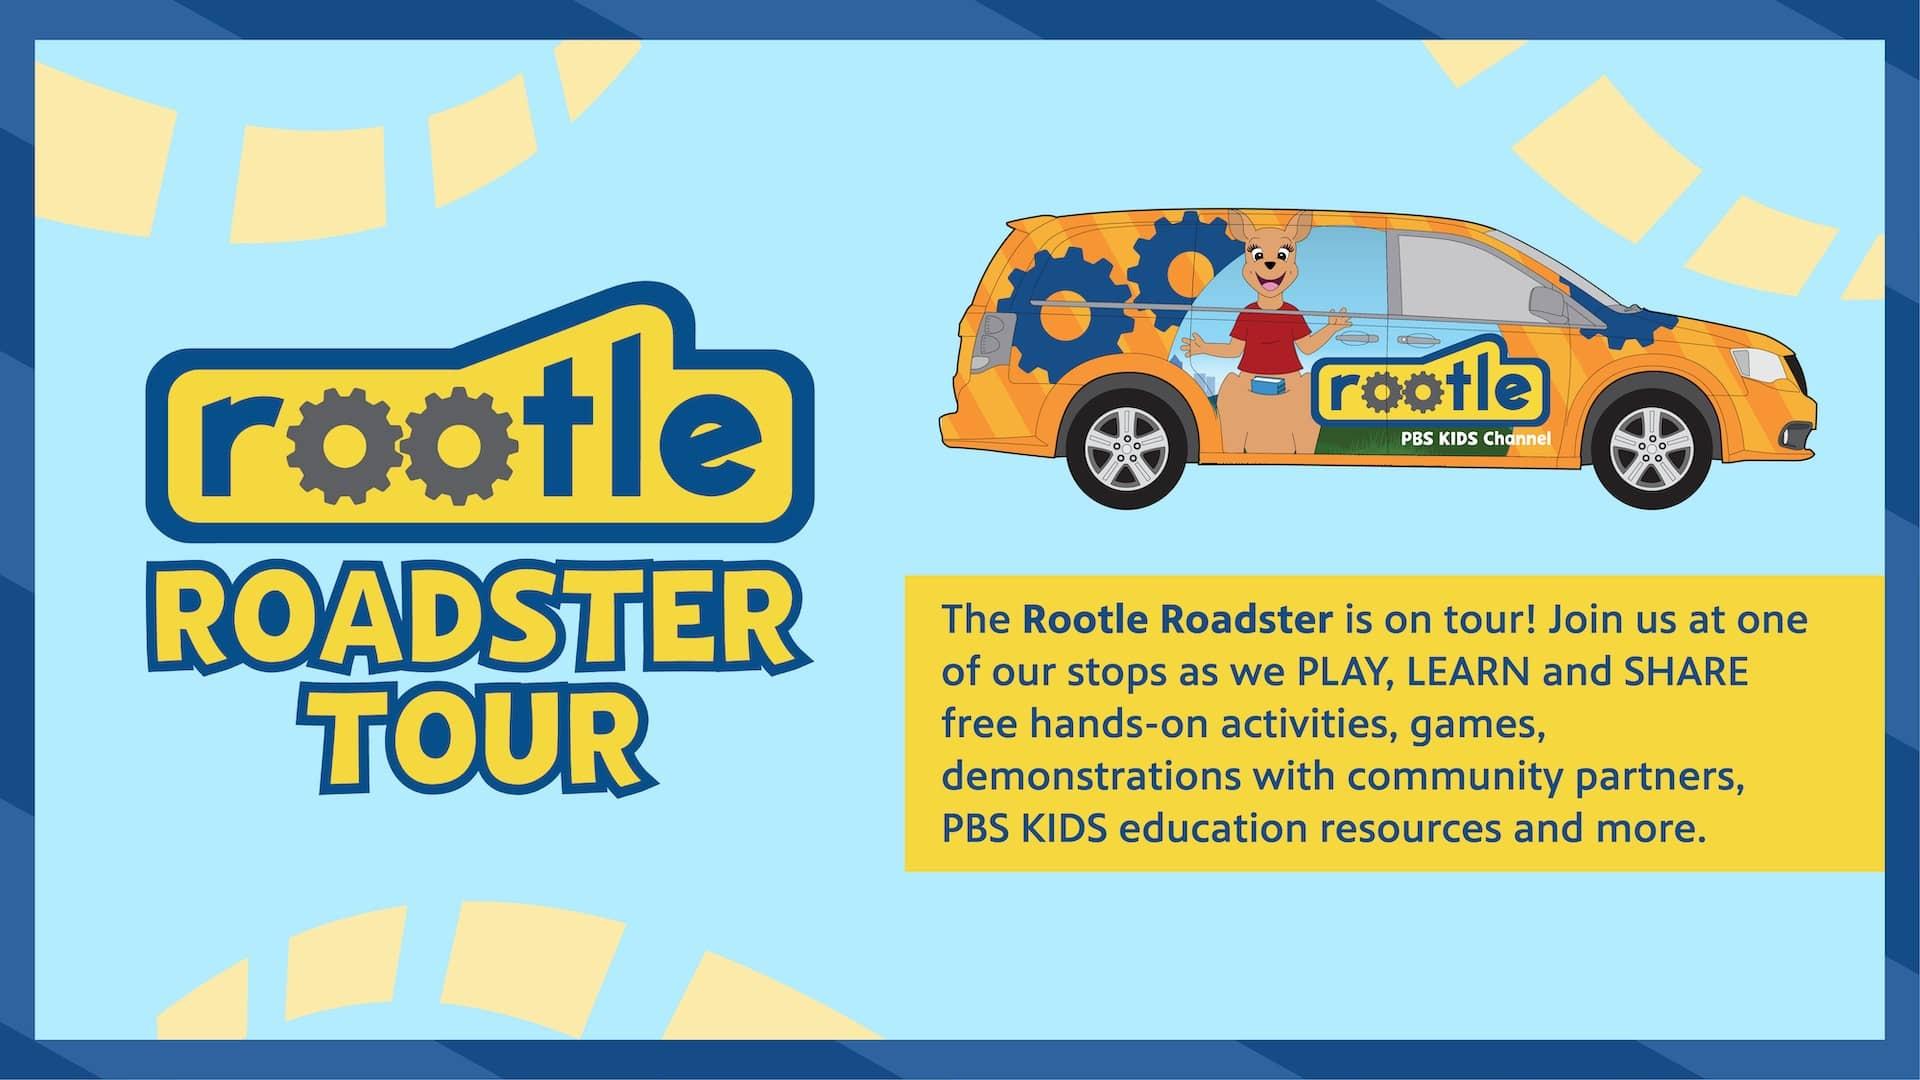 Colorful graphic with the Rootle Roadster Tour logo and a vehicle with rootle branding on it